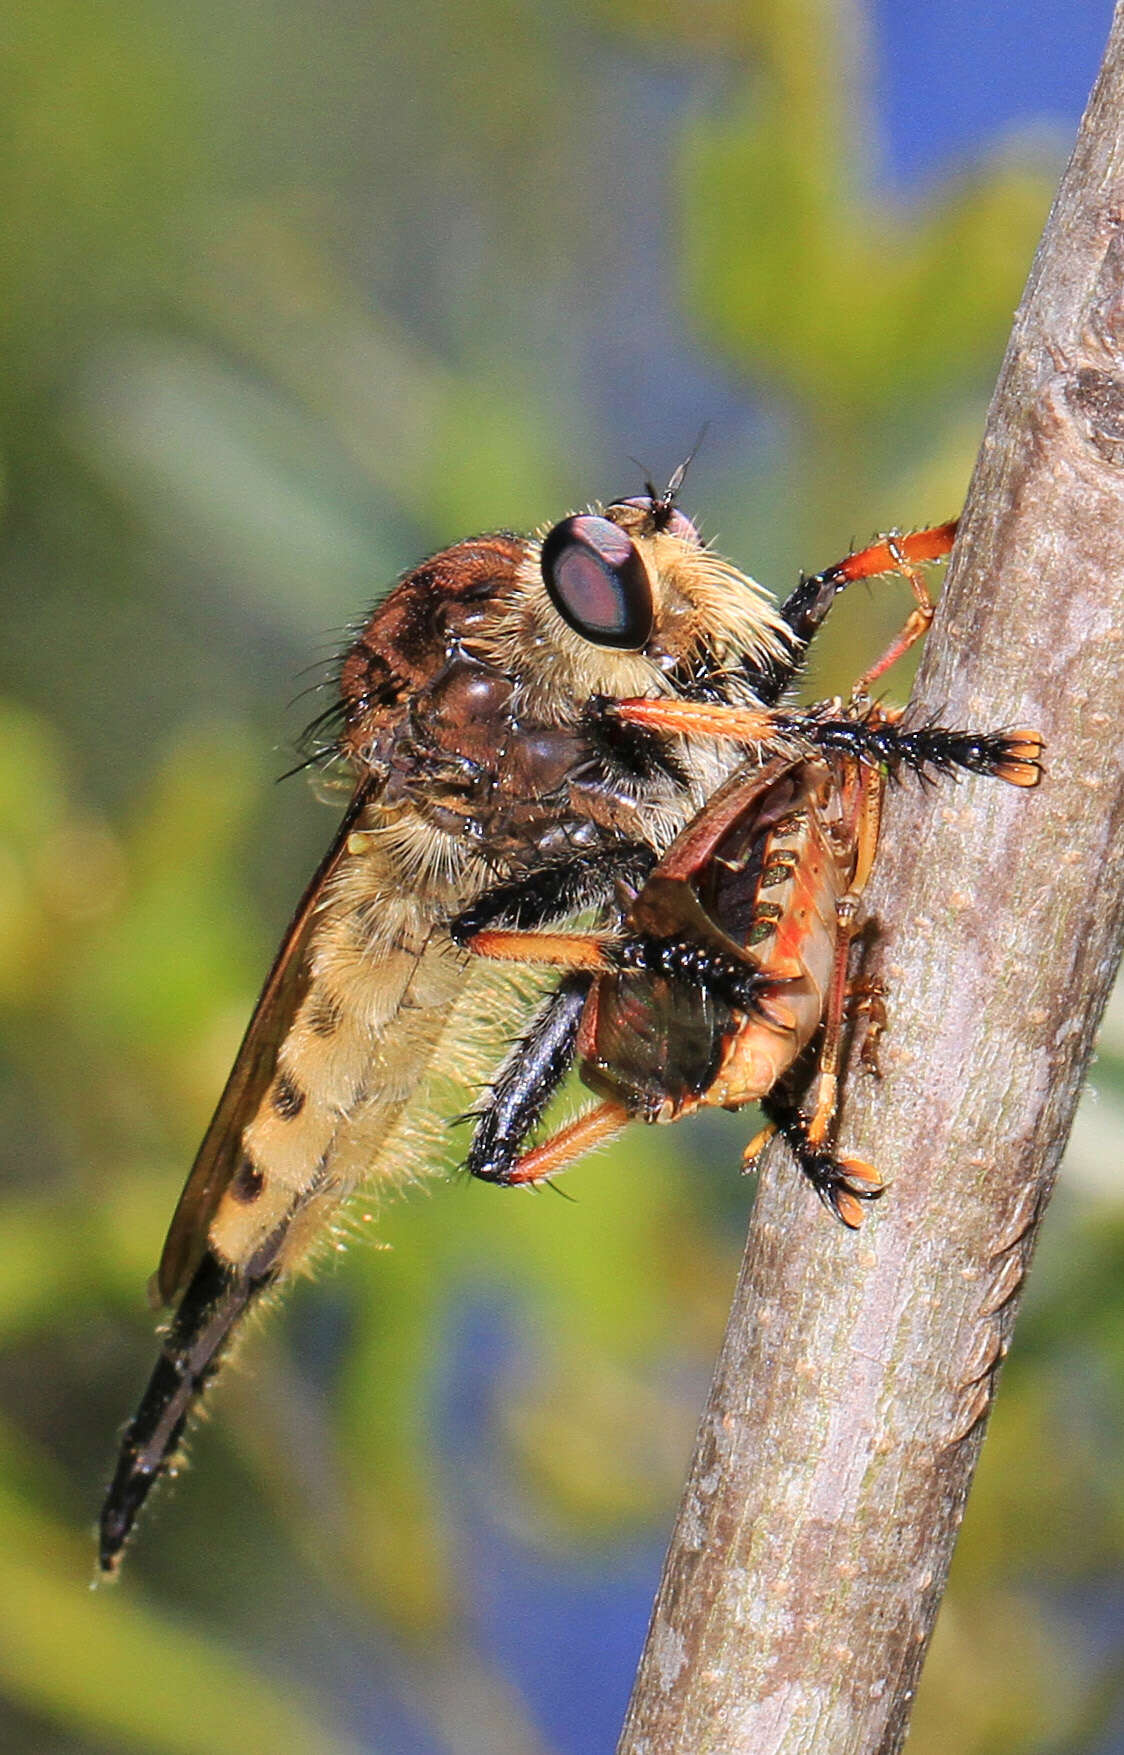 Image of Red-footed Cannibalfly